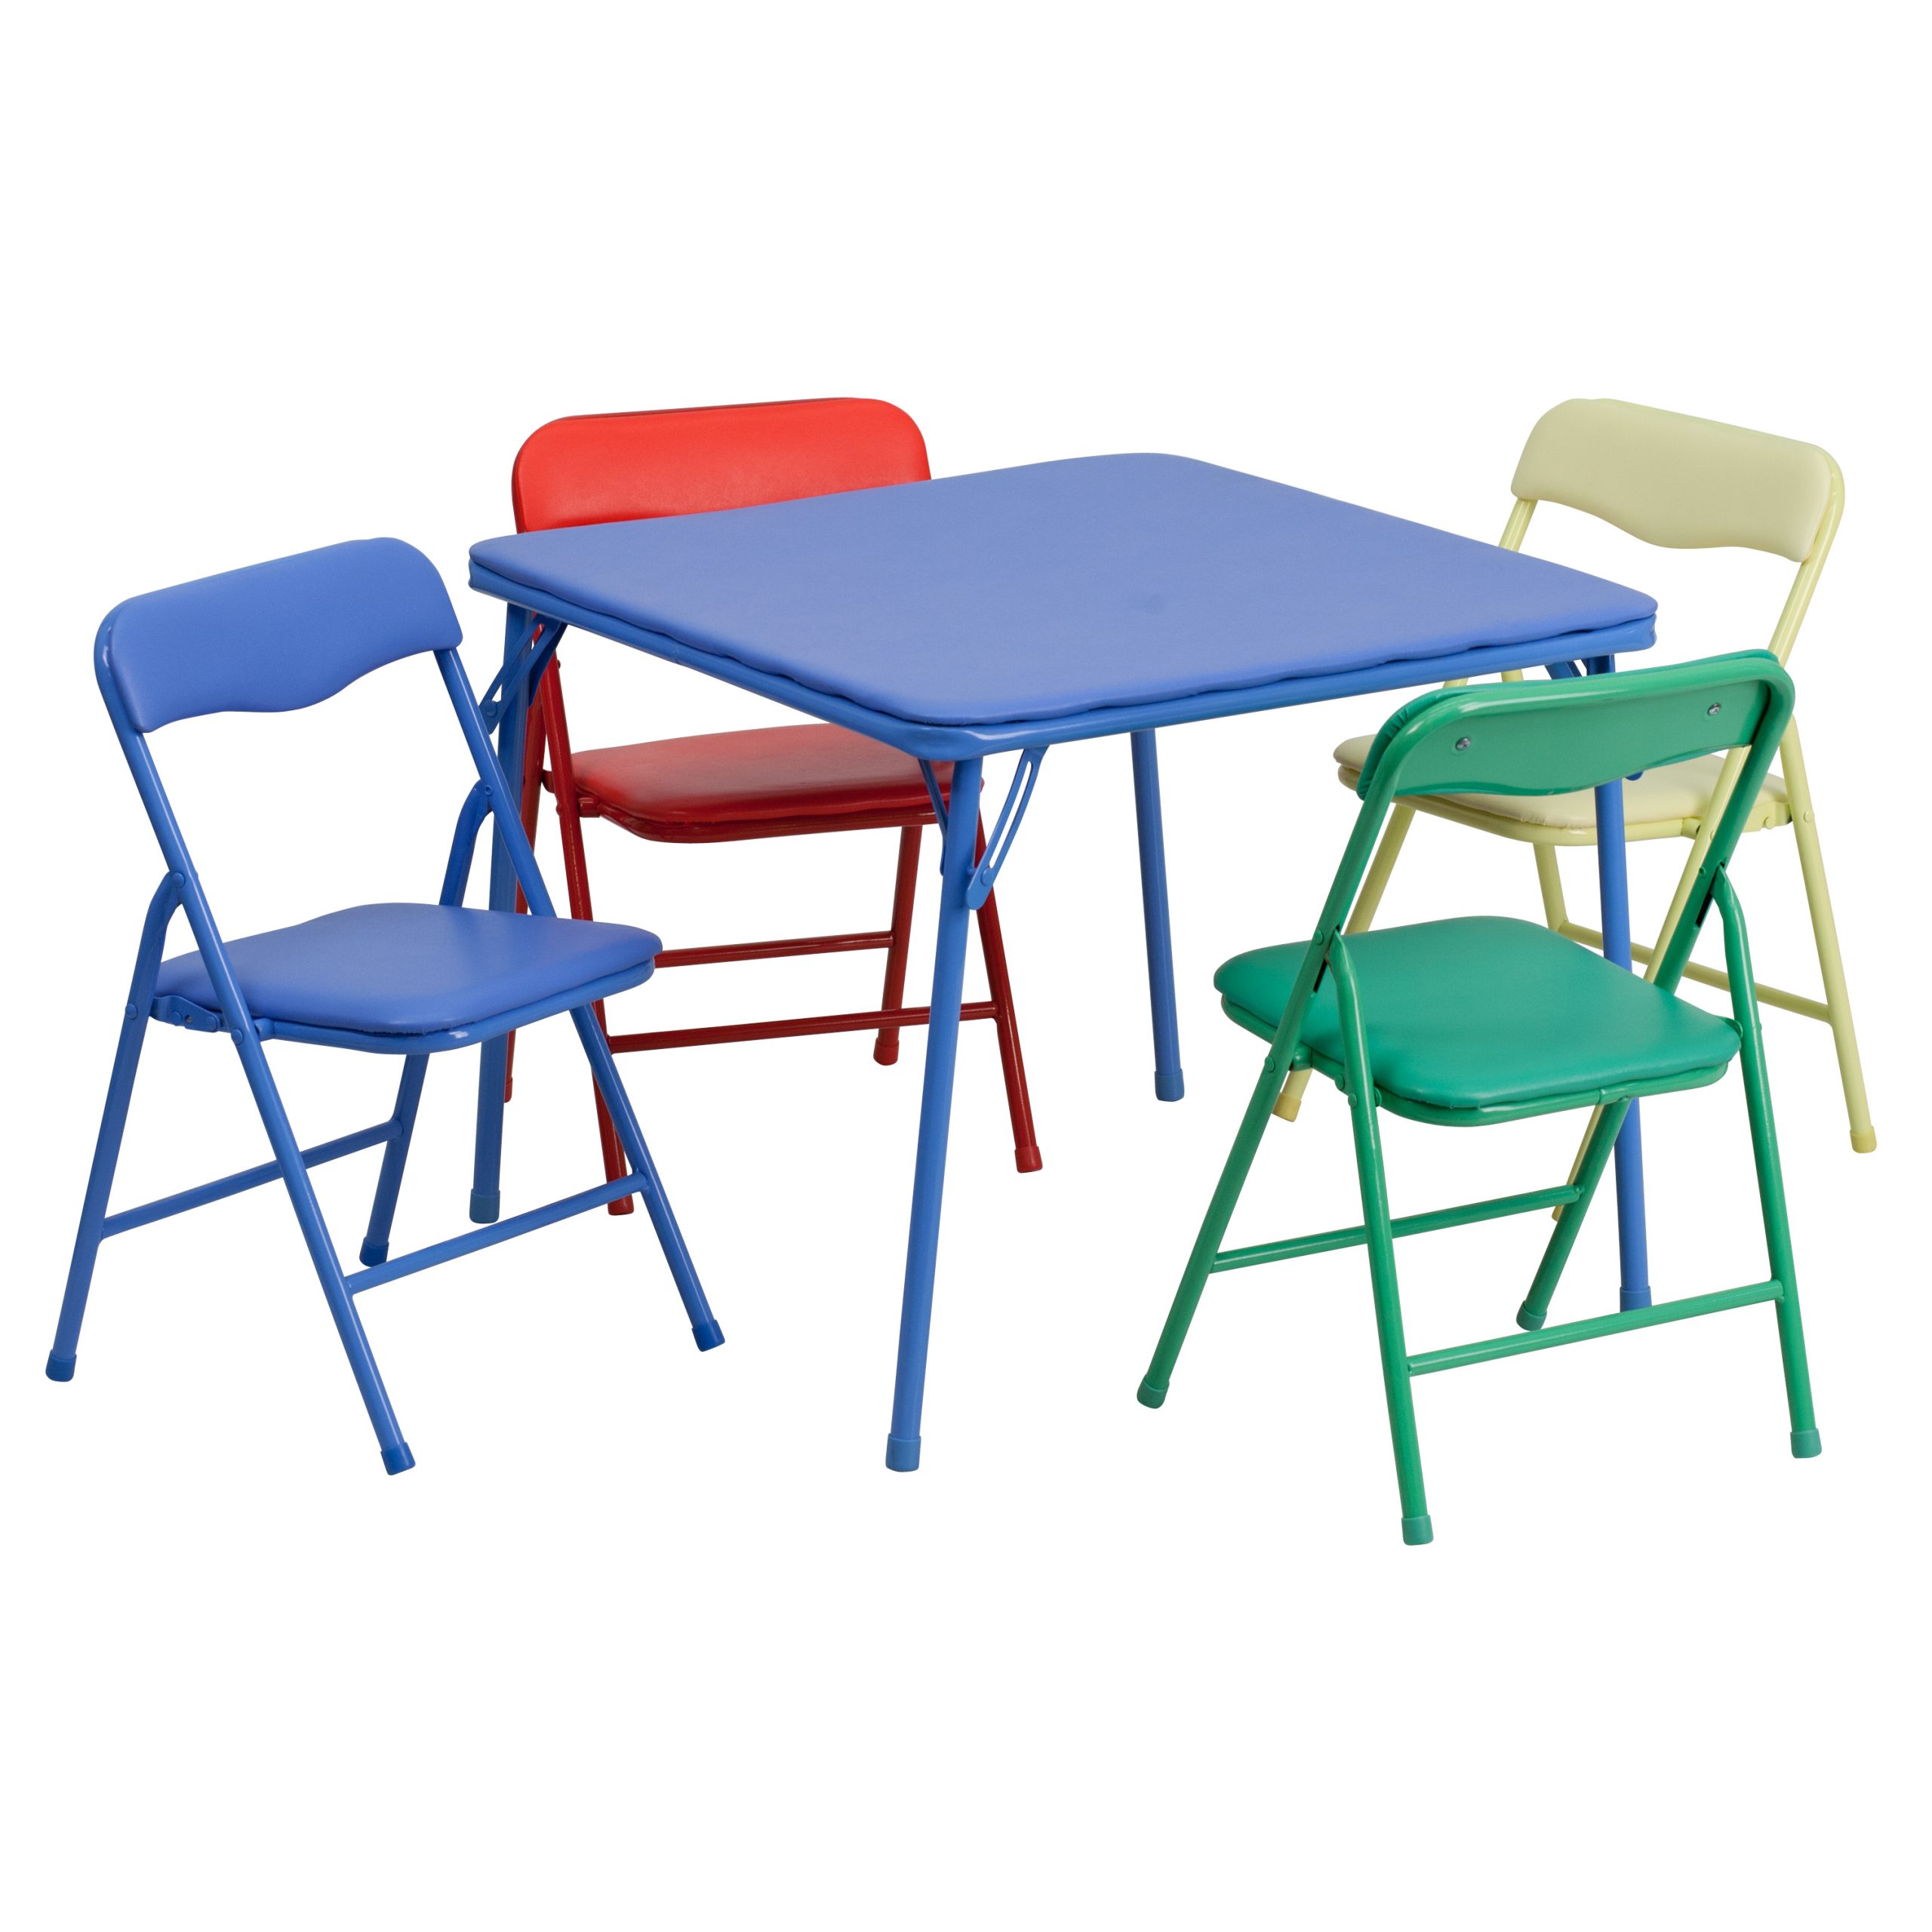 Fold Away Childrens Table And Chairs Uk • Display Cabinet